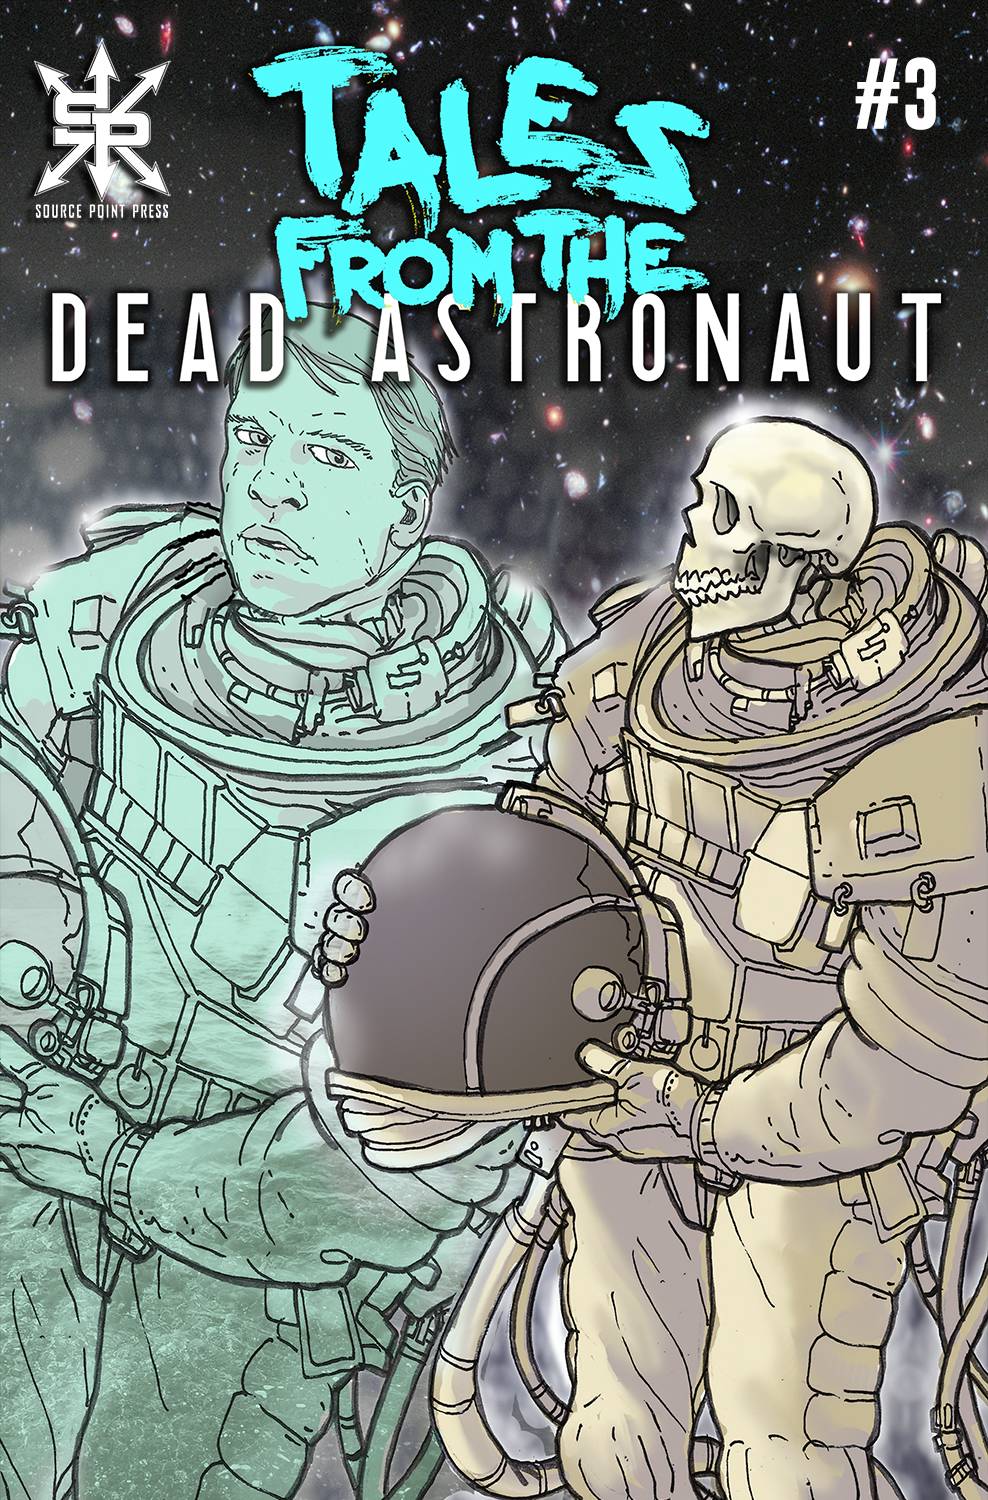 TALES FROM THE DEAD ASTRONAUT #3 (OF 3)